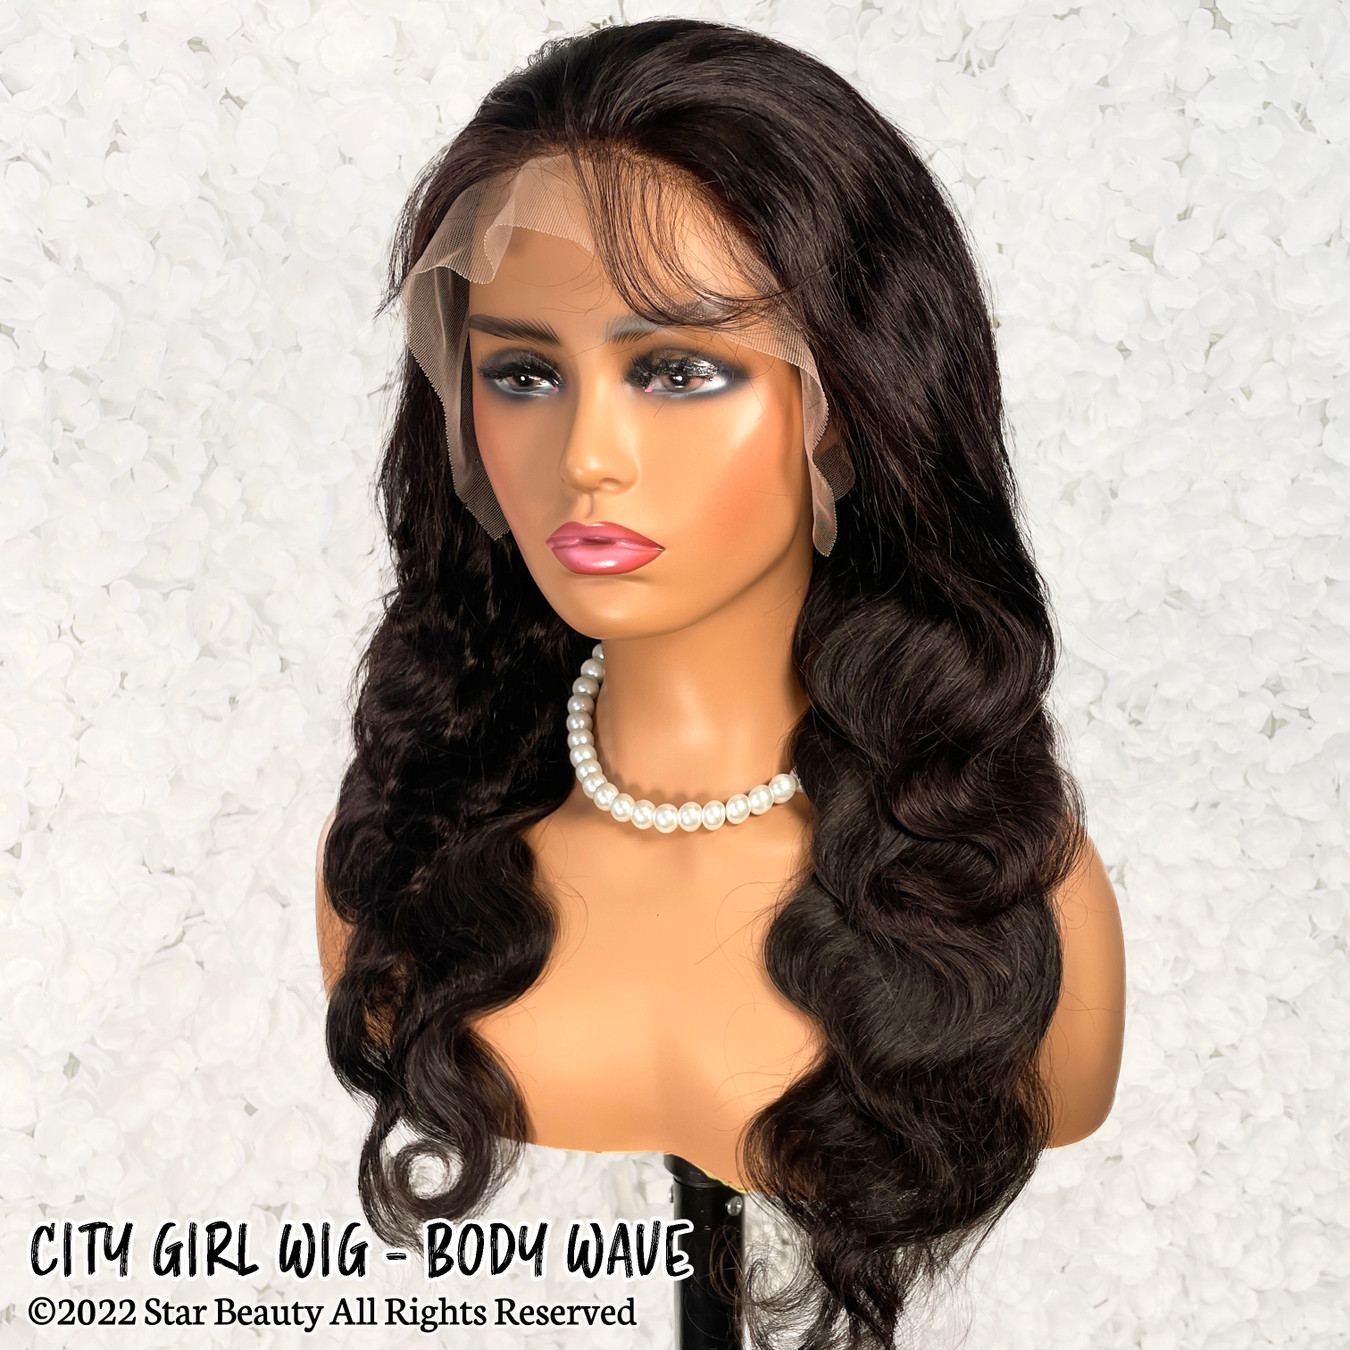 CITY GIRL 100% Human Hair 13x4 Frontal Wig - Body Wave (18"- 26")